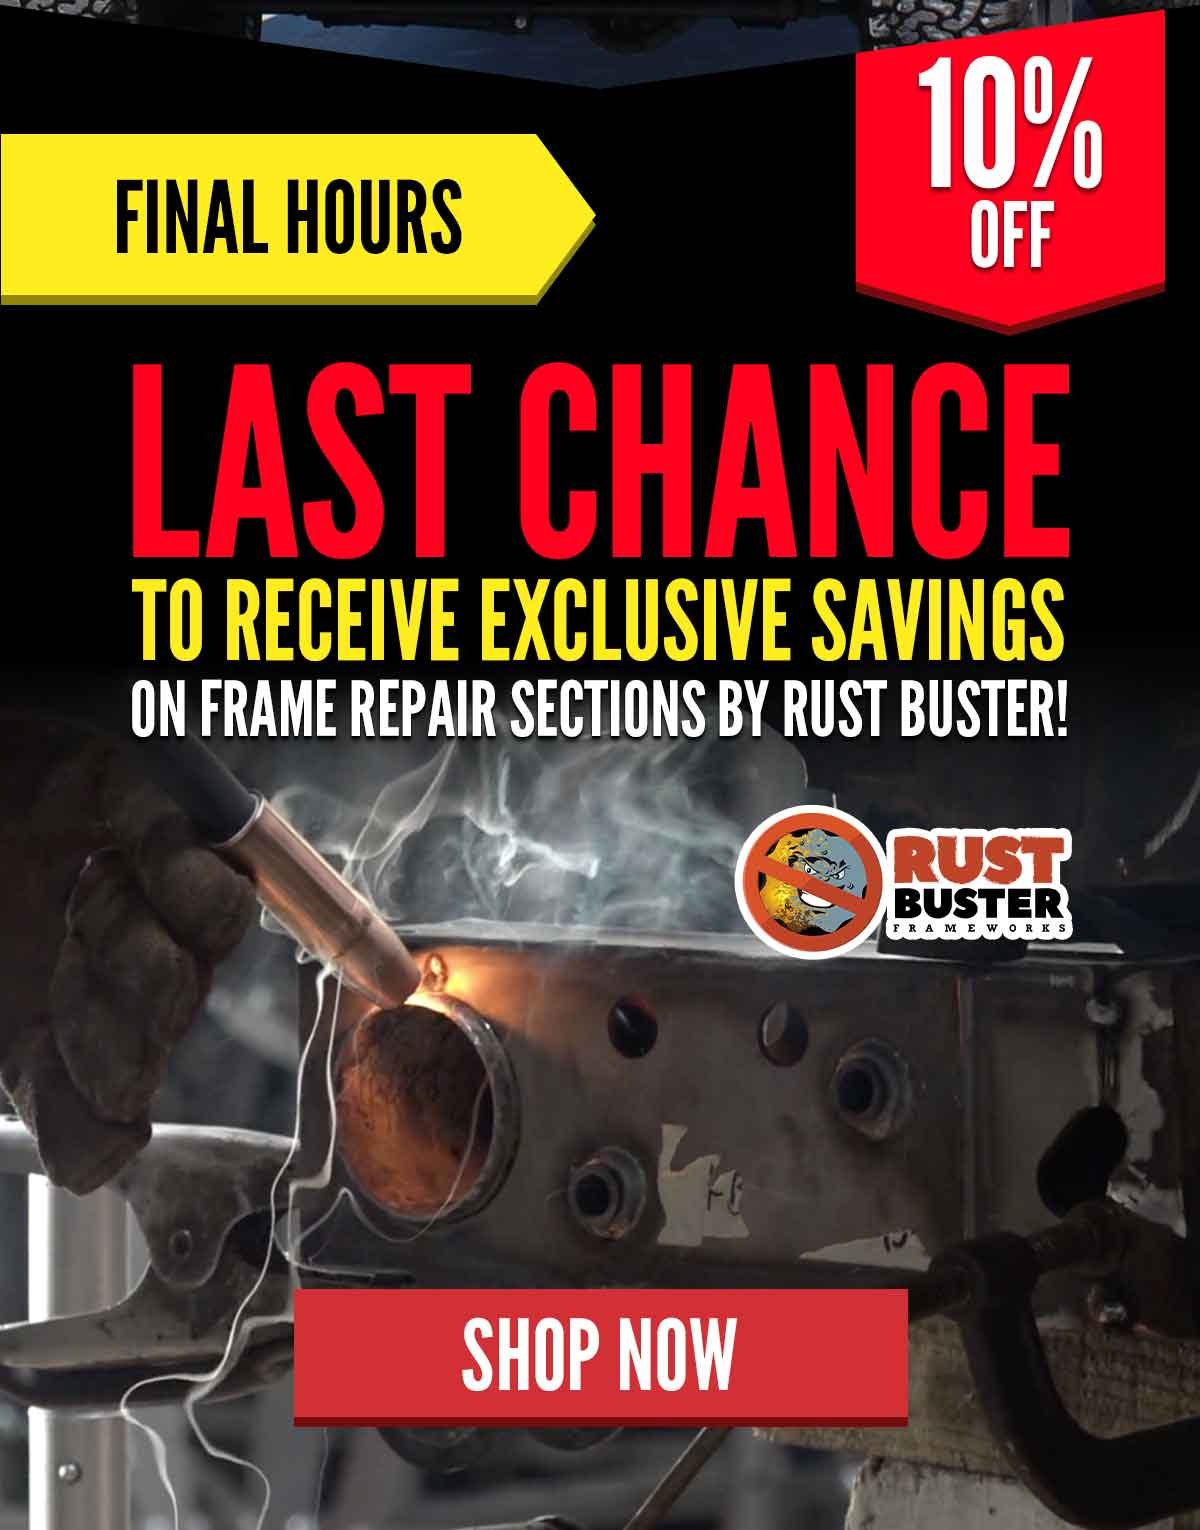 Last Chance To Receive Exclusive Savings On Frame Repair Sections By Rust Buster!